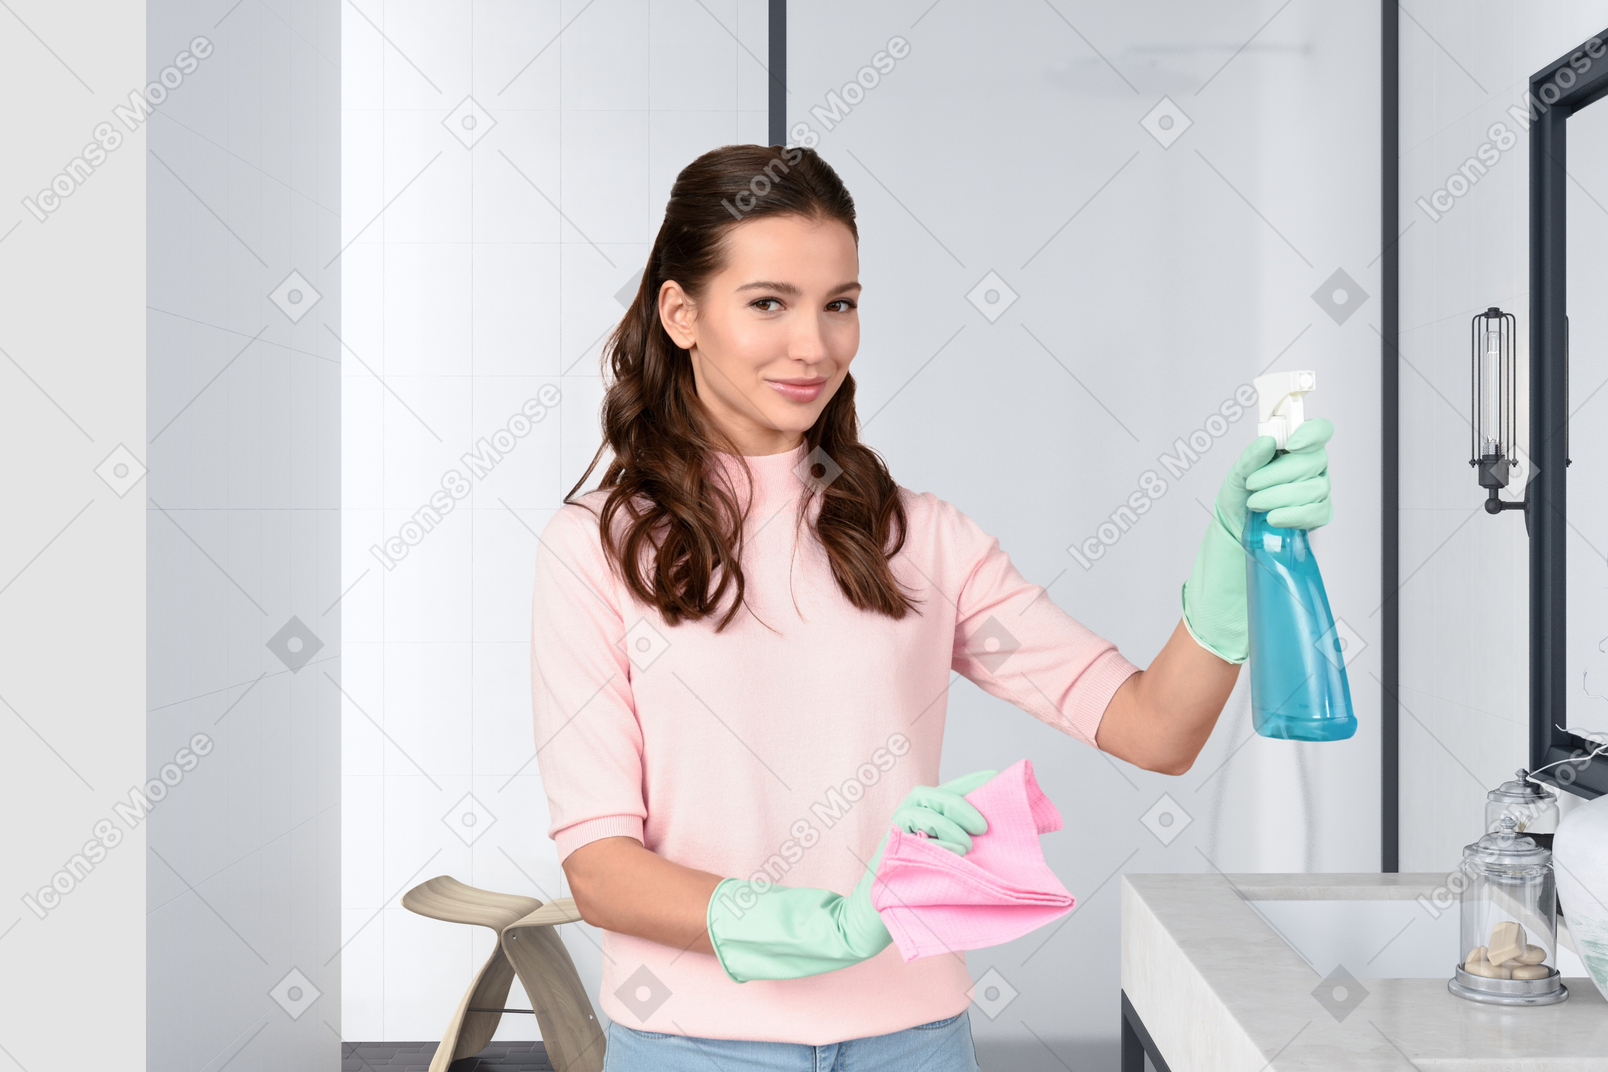 Collage of young woman cleaning bathroom